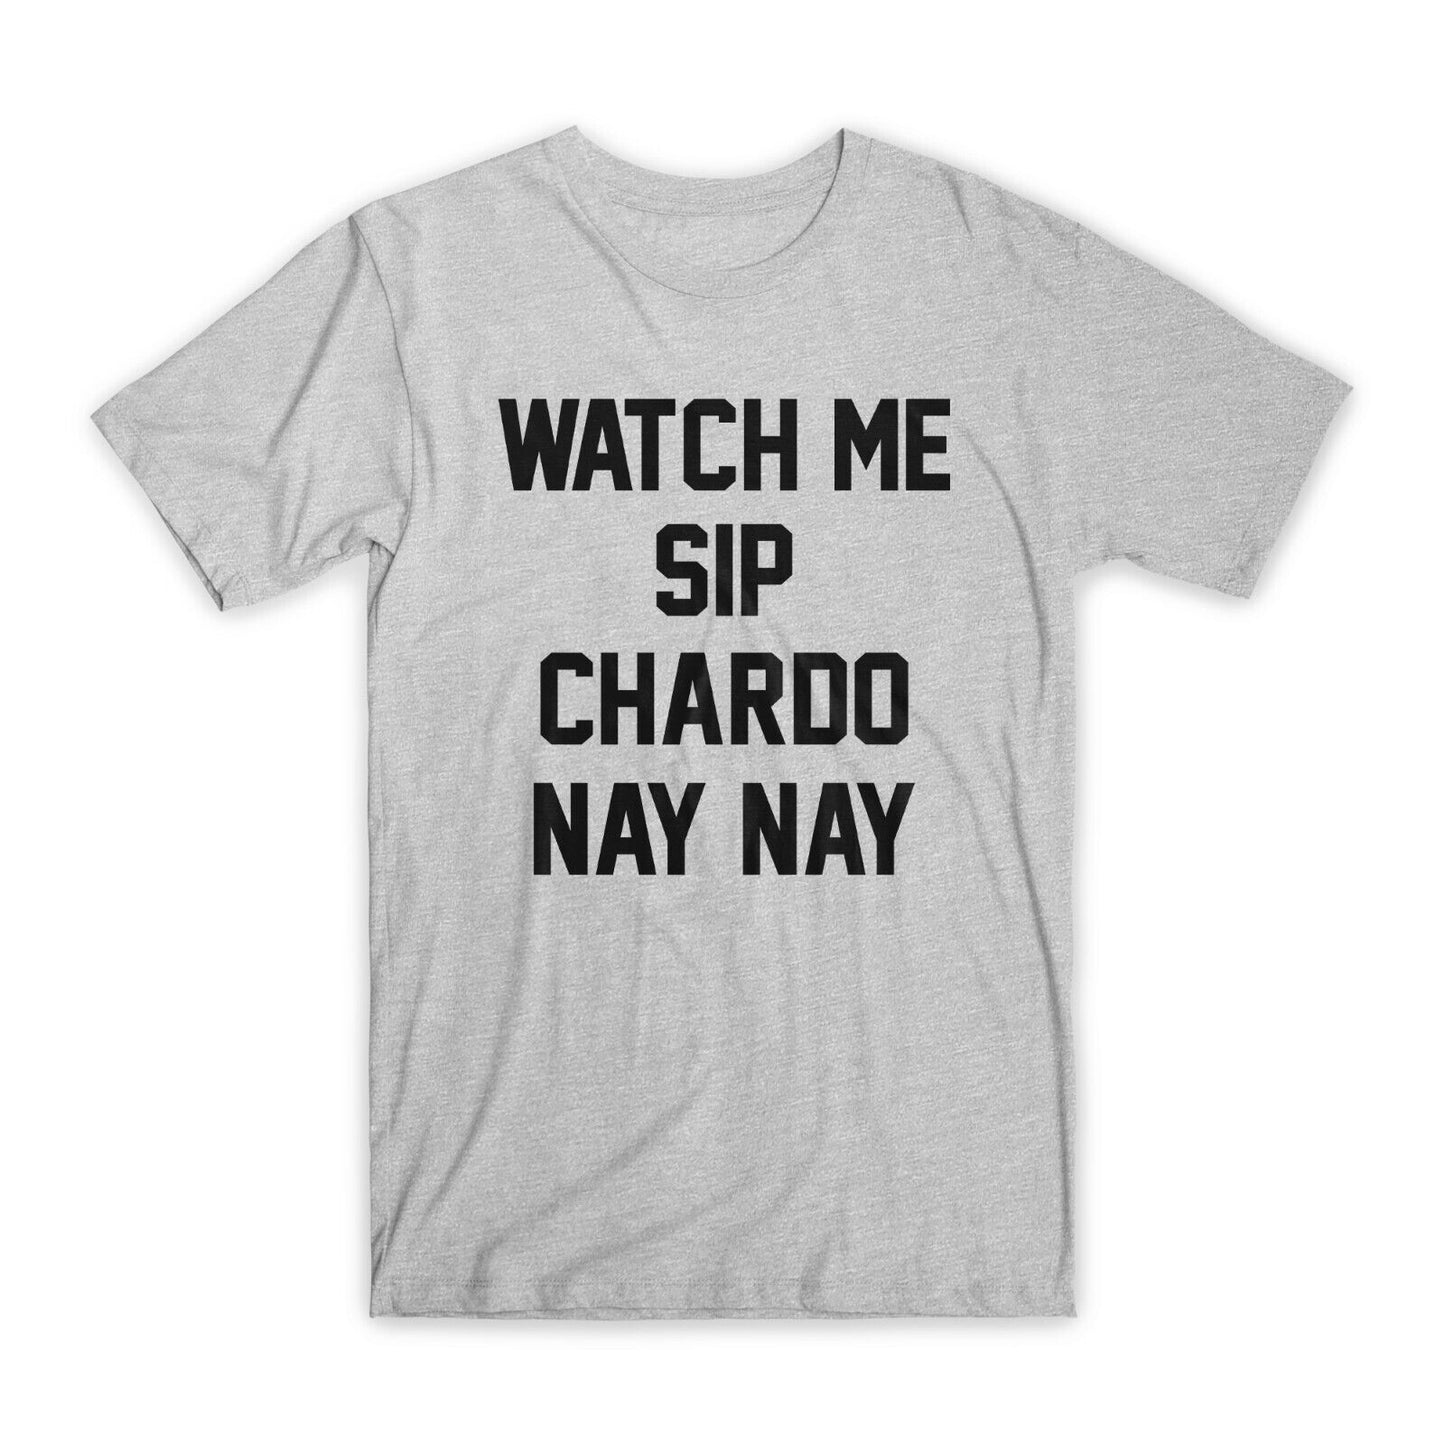 Watch Me Sip Chardo Nay Nay T-Shirt Premium Cotton Crew Neck Funny Tees Gift NEW